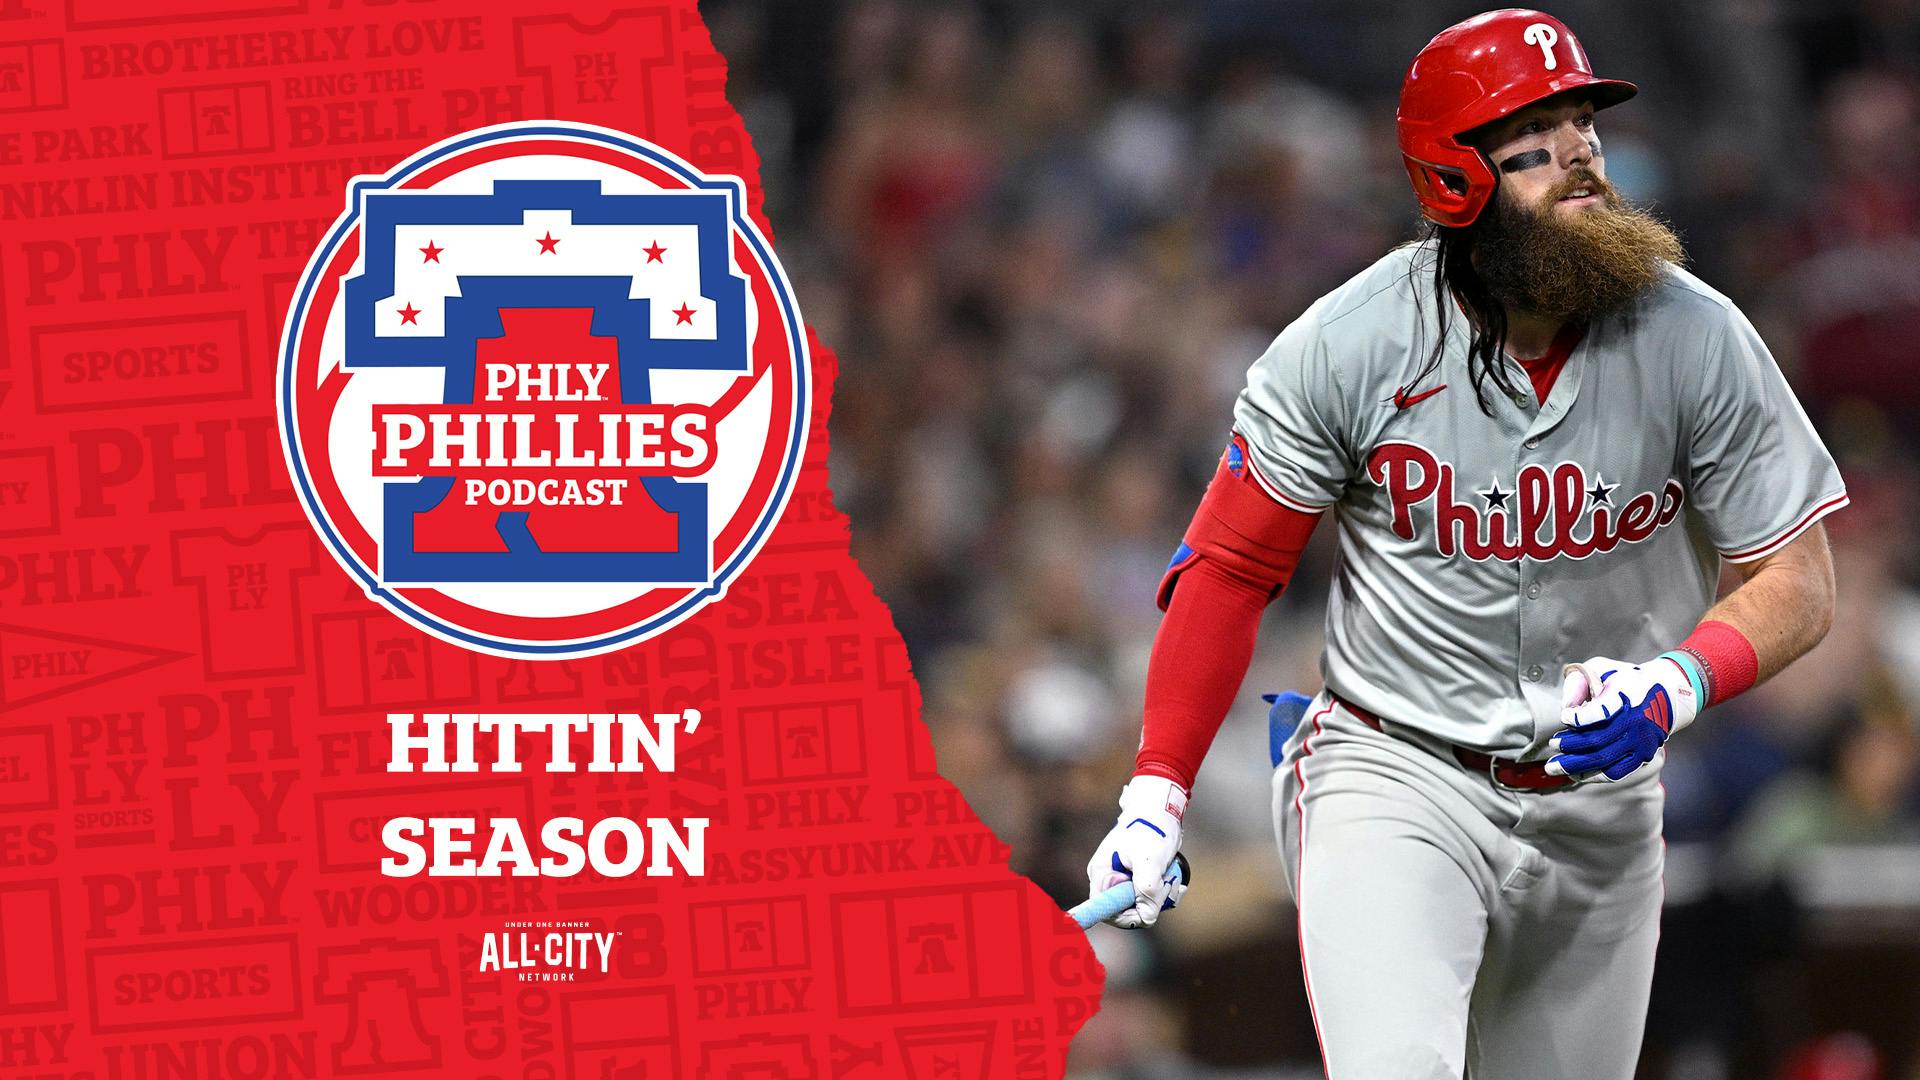 PHLY Phillies Podcast | Phillies hit 5 HRs, Aaron Nola pitches into the 8th inning as they game one of the series w/Padres